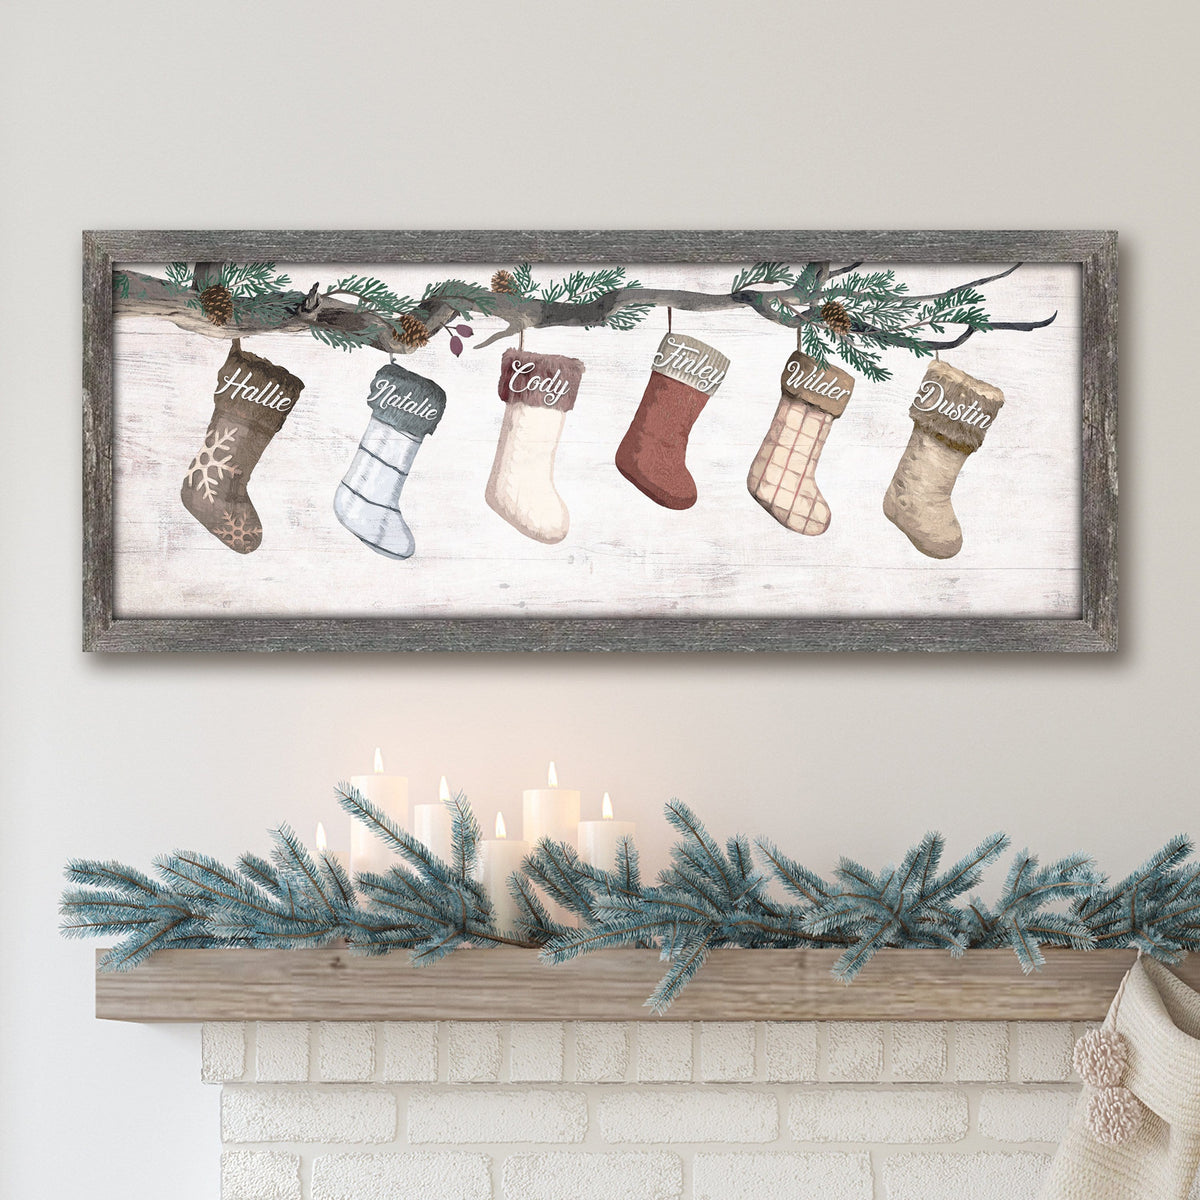 Personalized christmas decor and gifts from Personal Prints